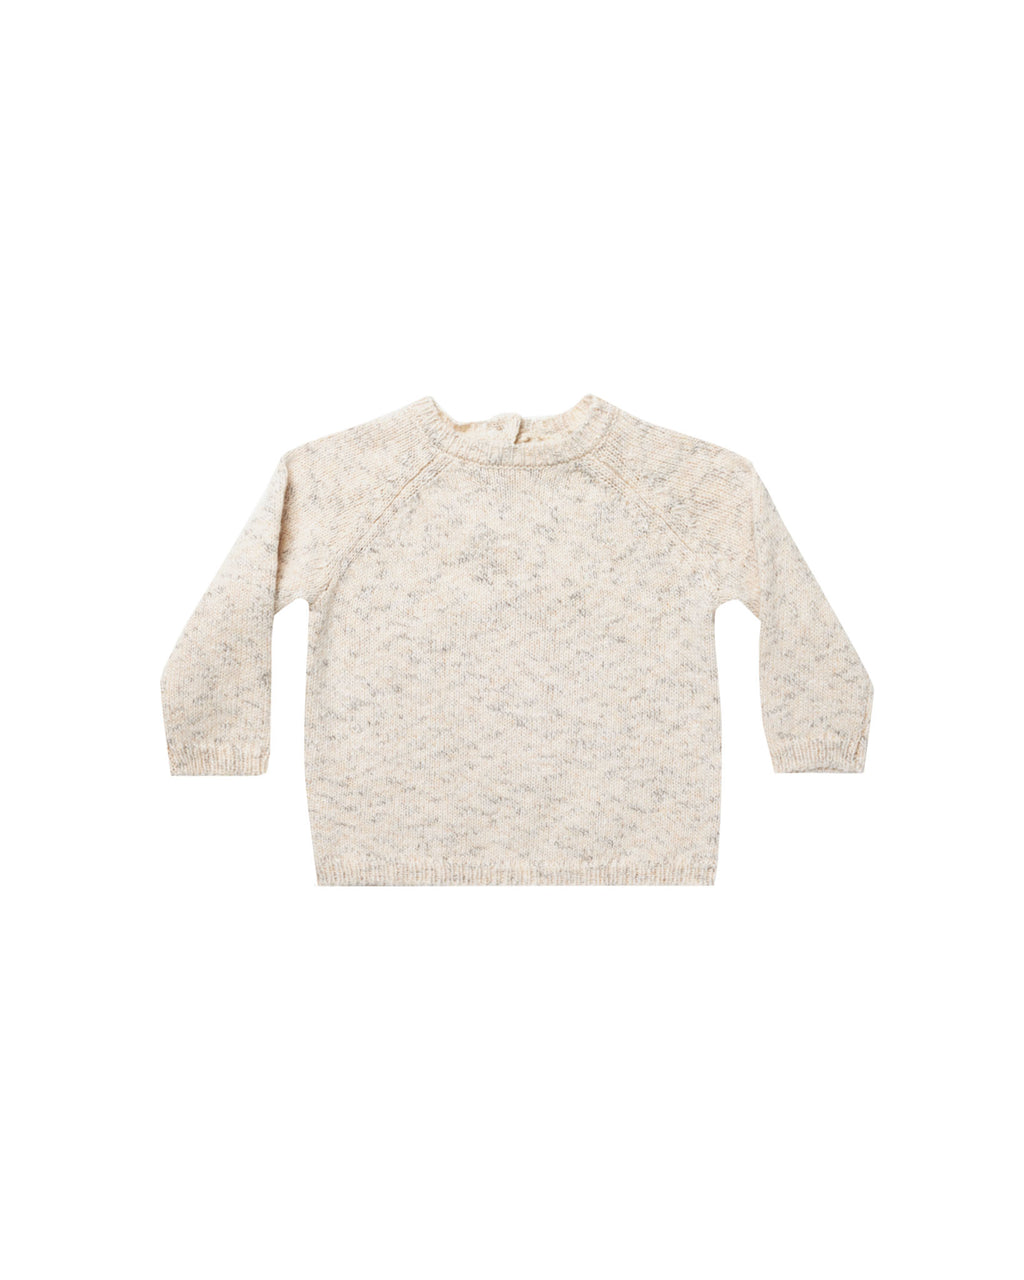 Quincy Mae Speckled Knit Sweater- Natural